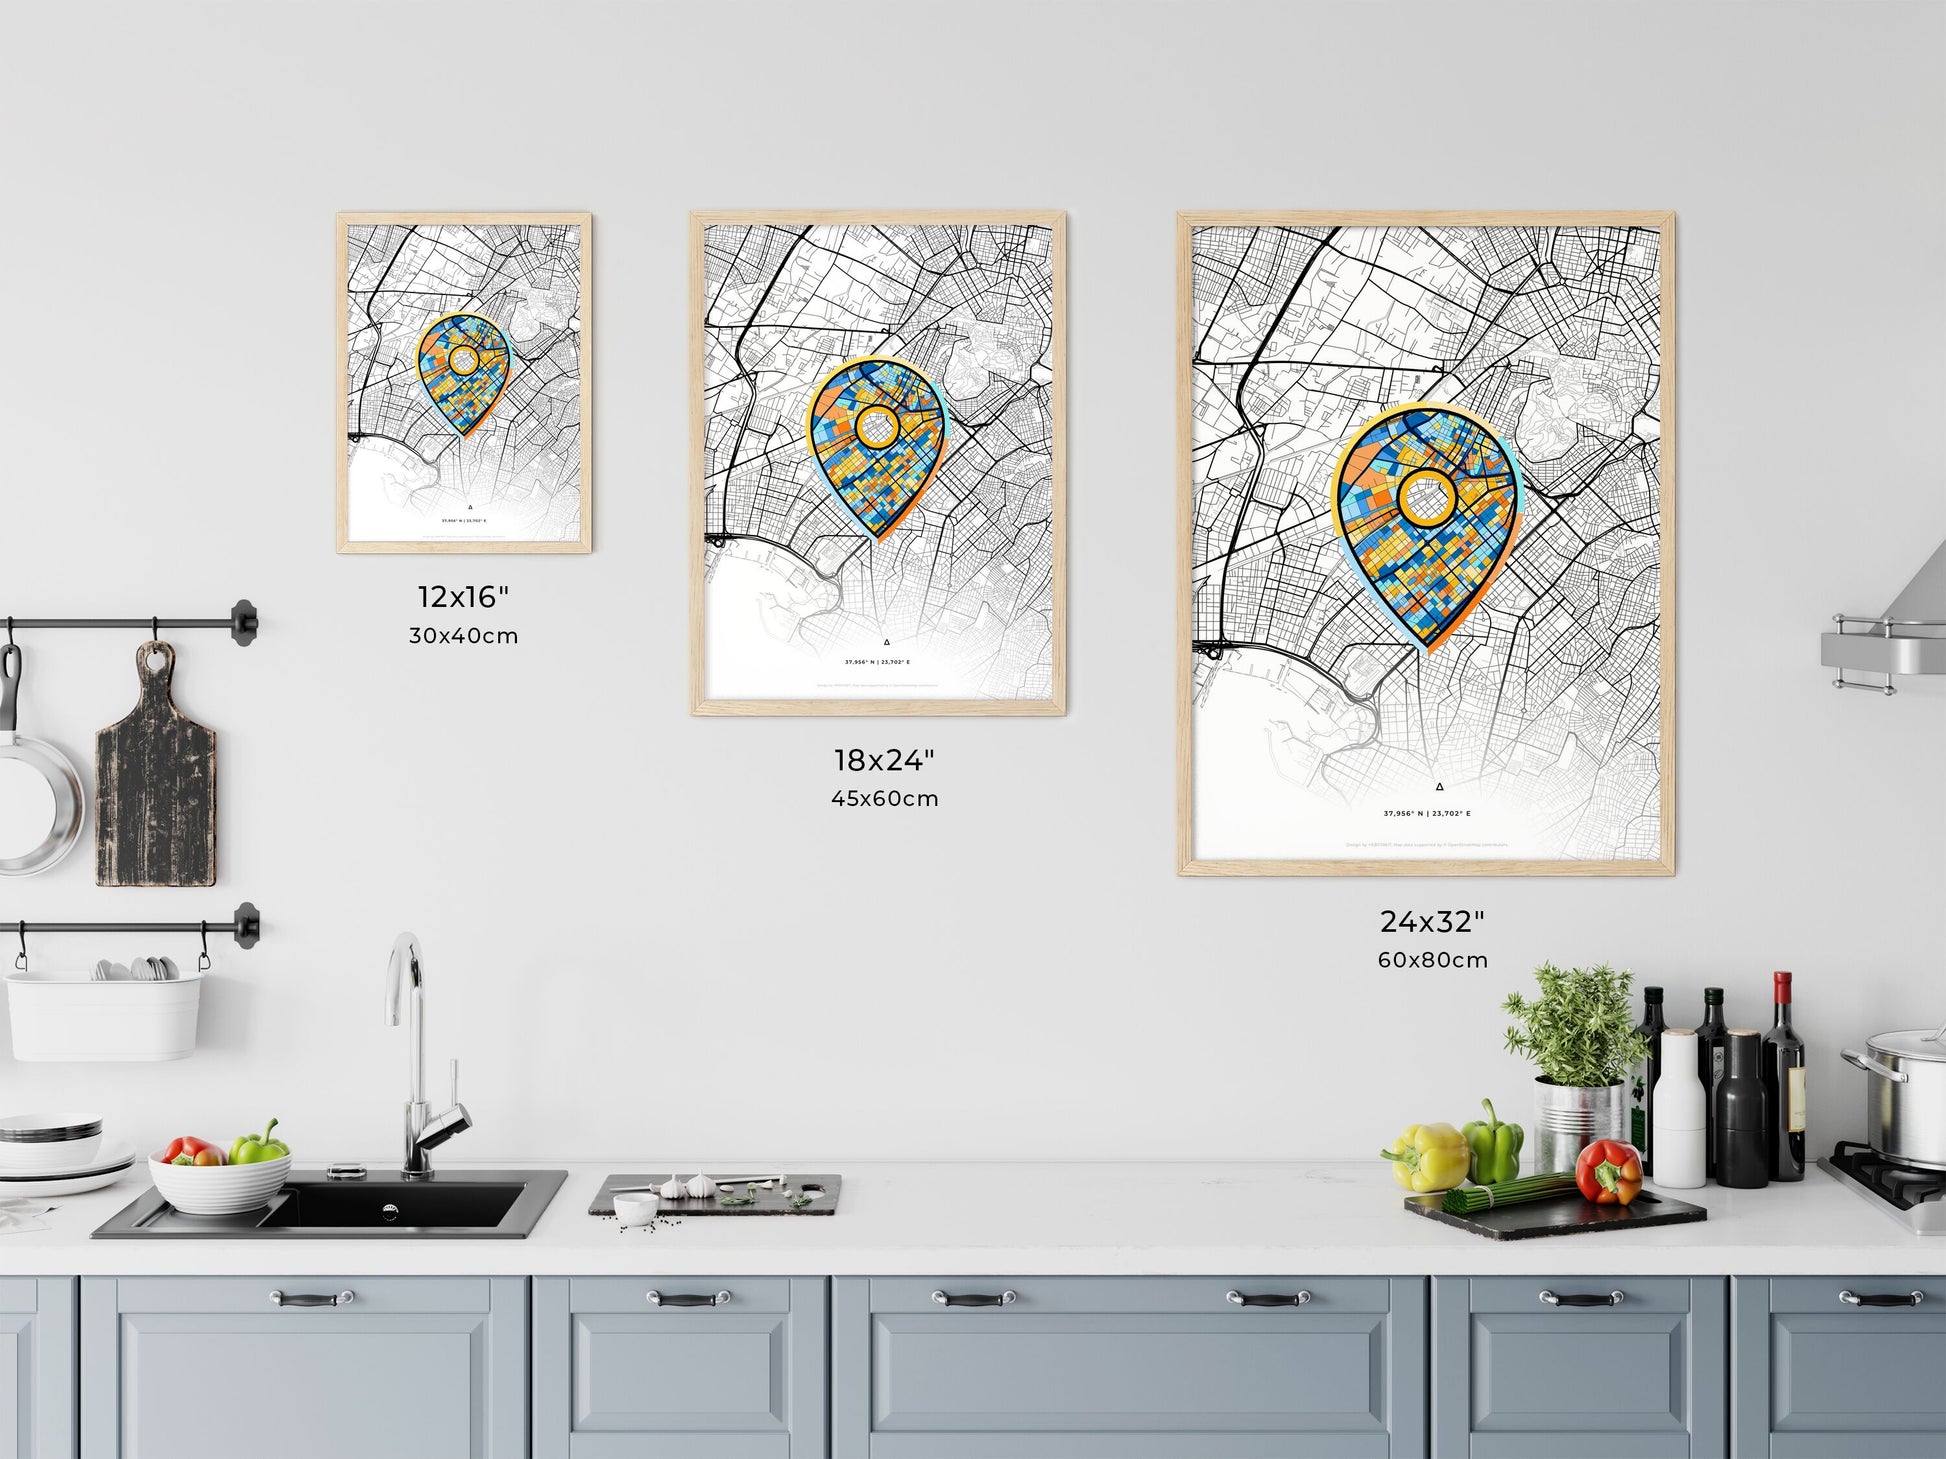 KALLITHEA GREECE minimal art map with a colorful icon. Where it all began, Couple map gift.